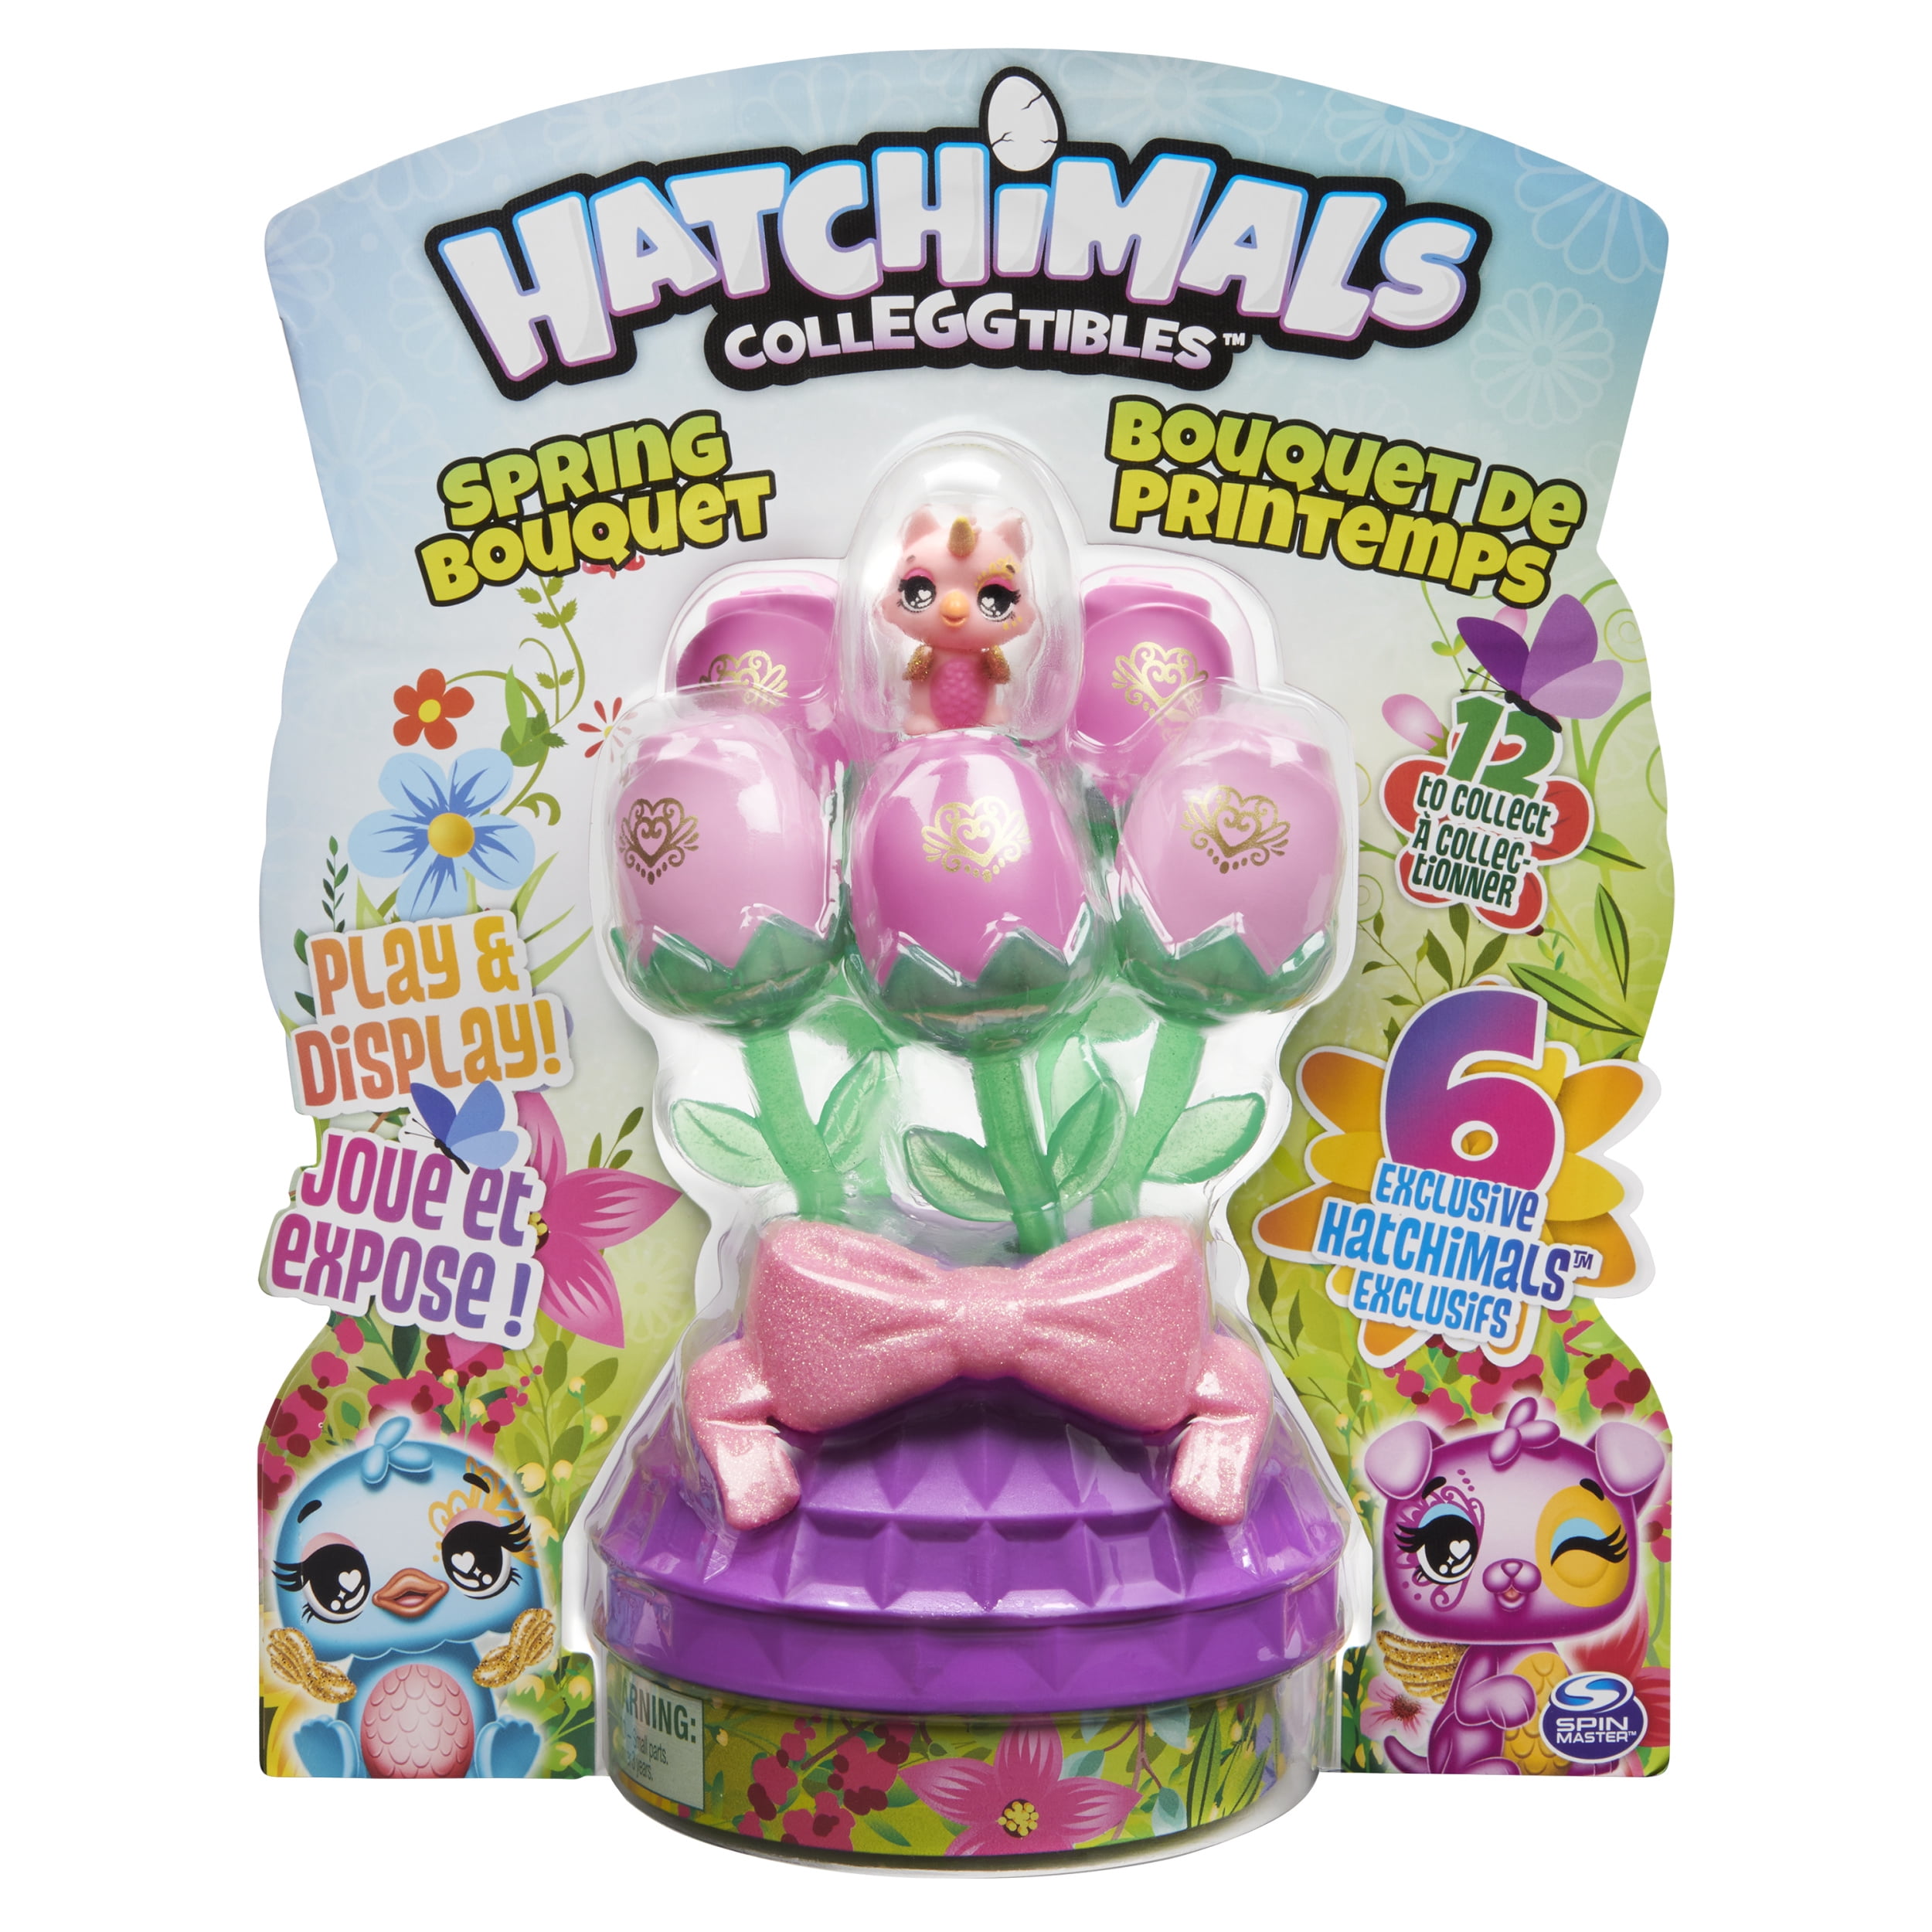 Ages 5 & Up Hatchimals CollEGGtibles Basket with 6 Hatchimals CollEGGtibles 